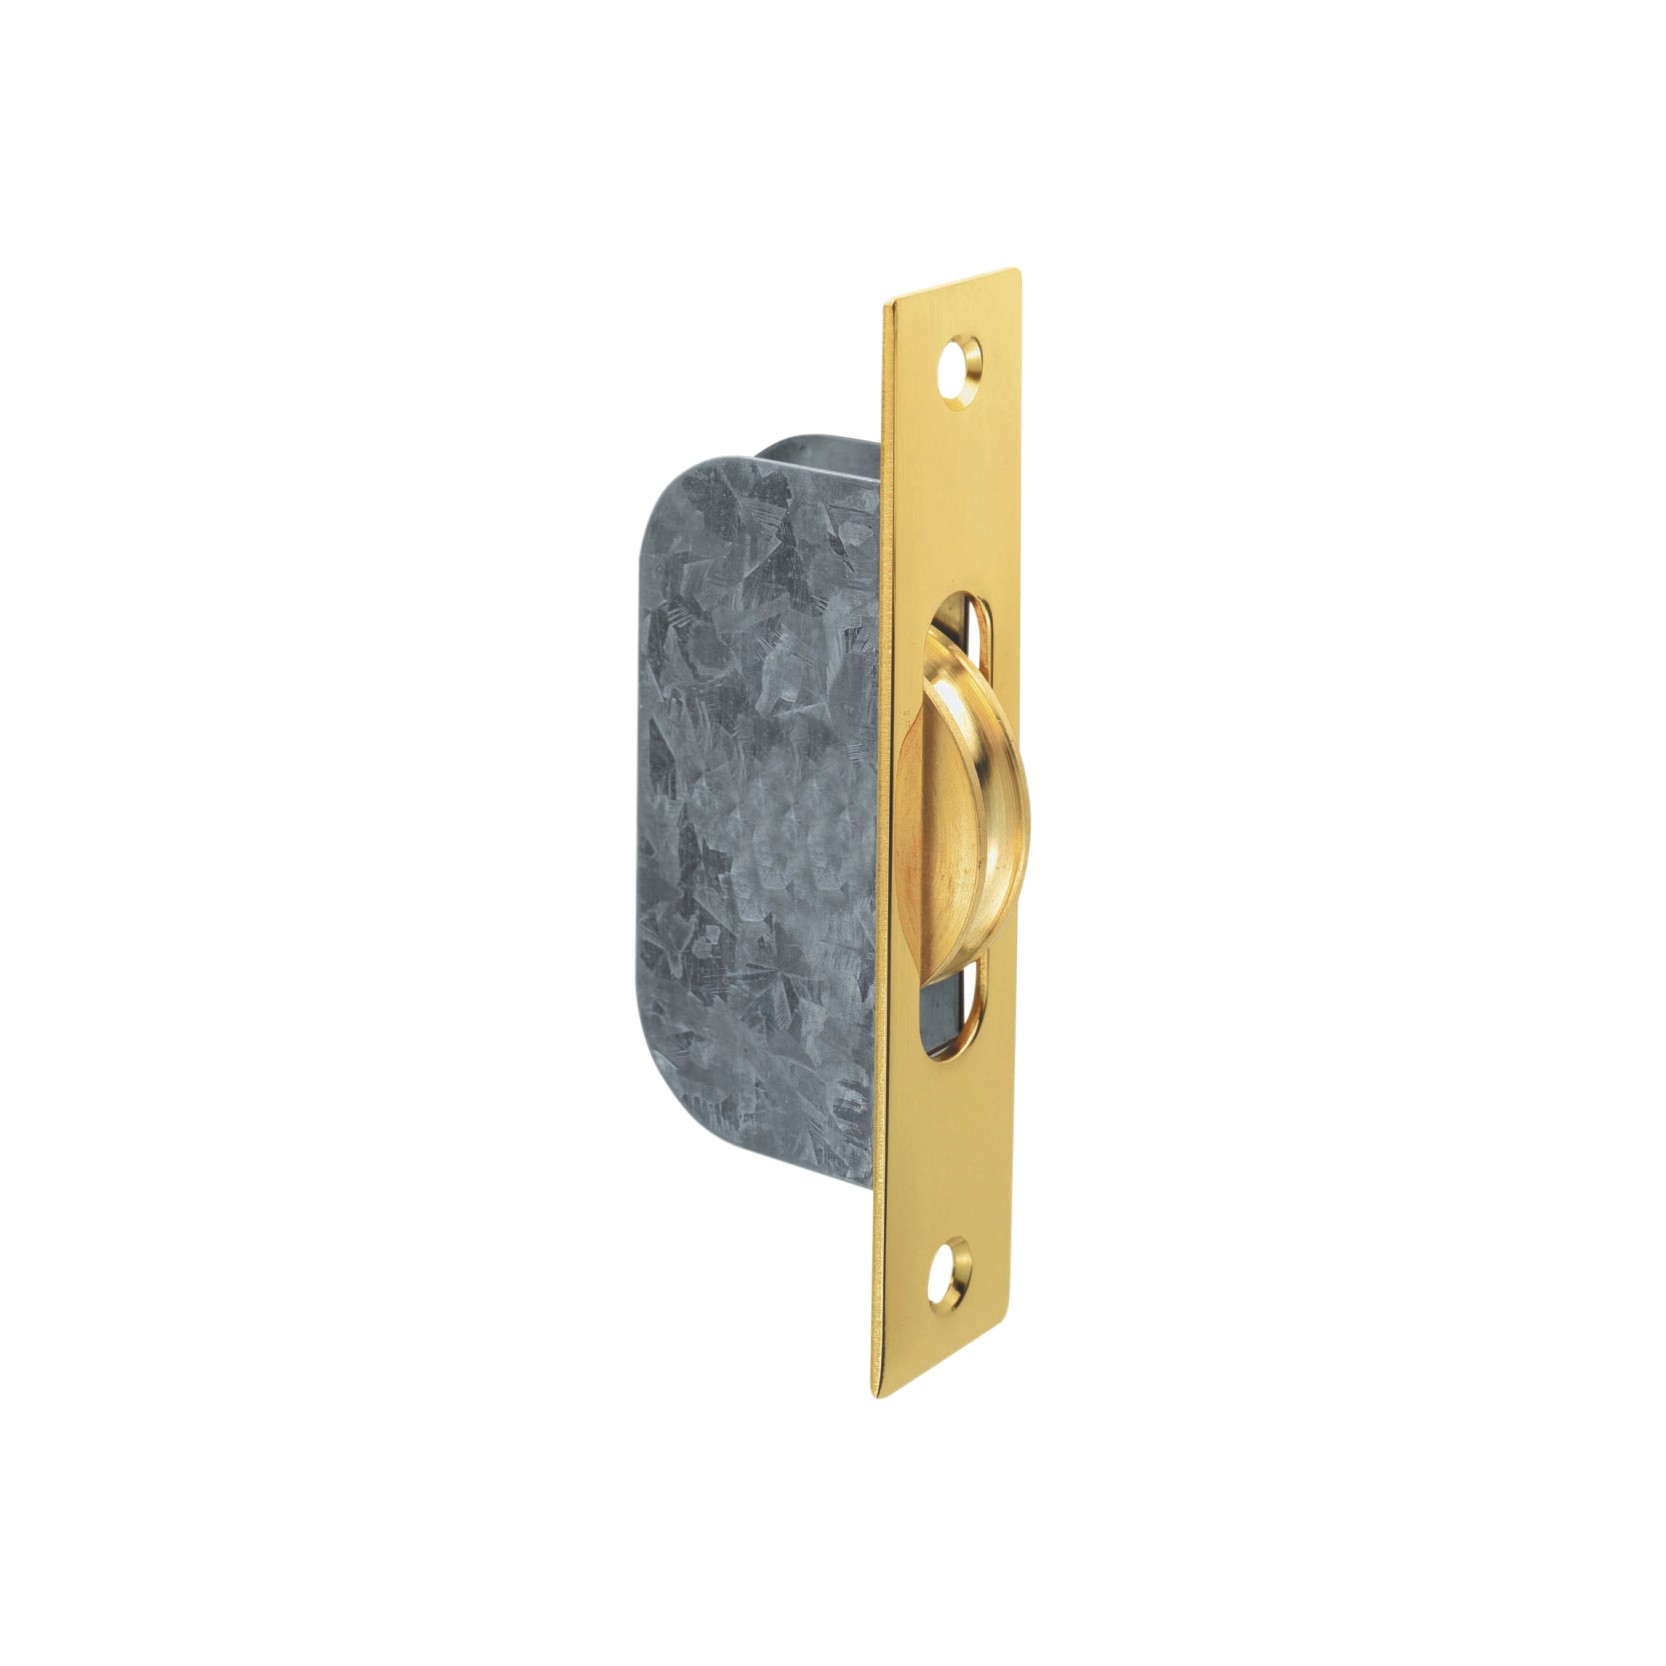 Sash Window Axle Pulley Heavy Square Forend With Sash Pulley -1117x25mm